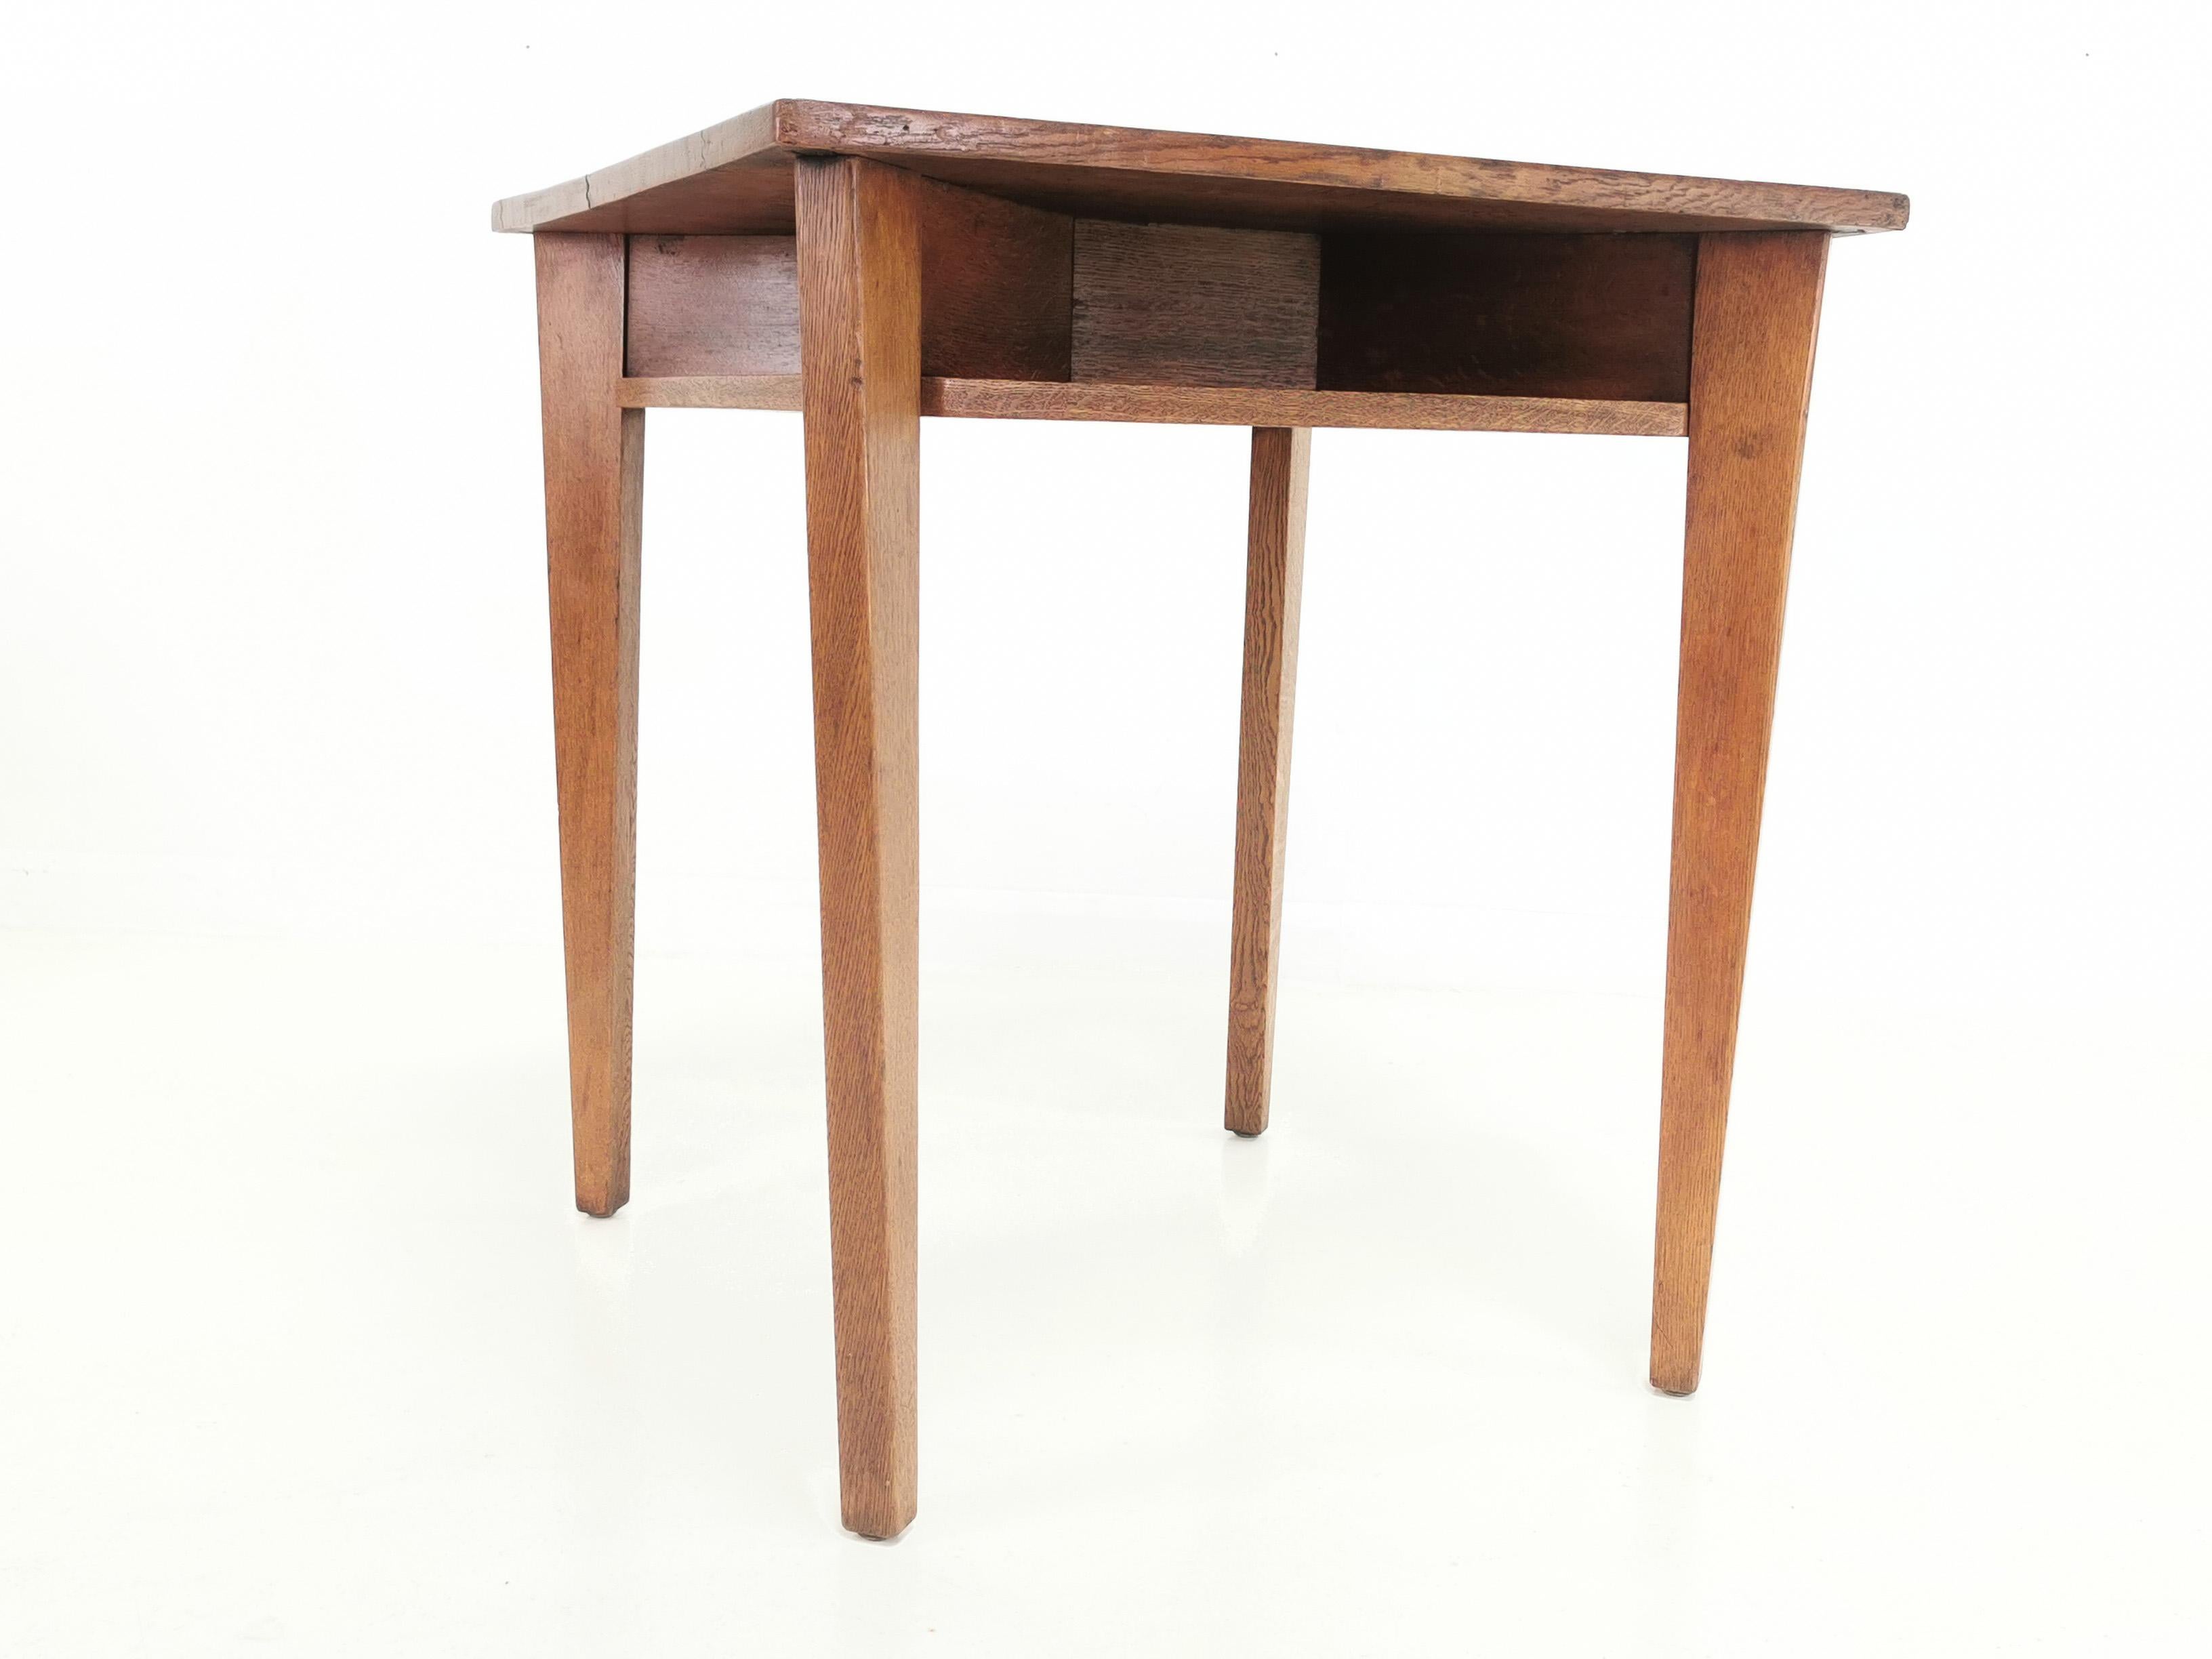 Gordon Russell table

Gordon Russell 1930s British made occasional table that can be used as a desk. Made from oak, the table has under tier storage sections and is a very compact size. It has light wear commensurate with age and use.

Gordon